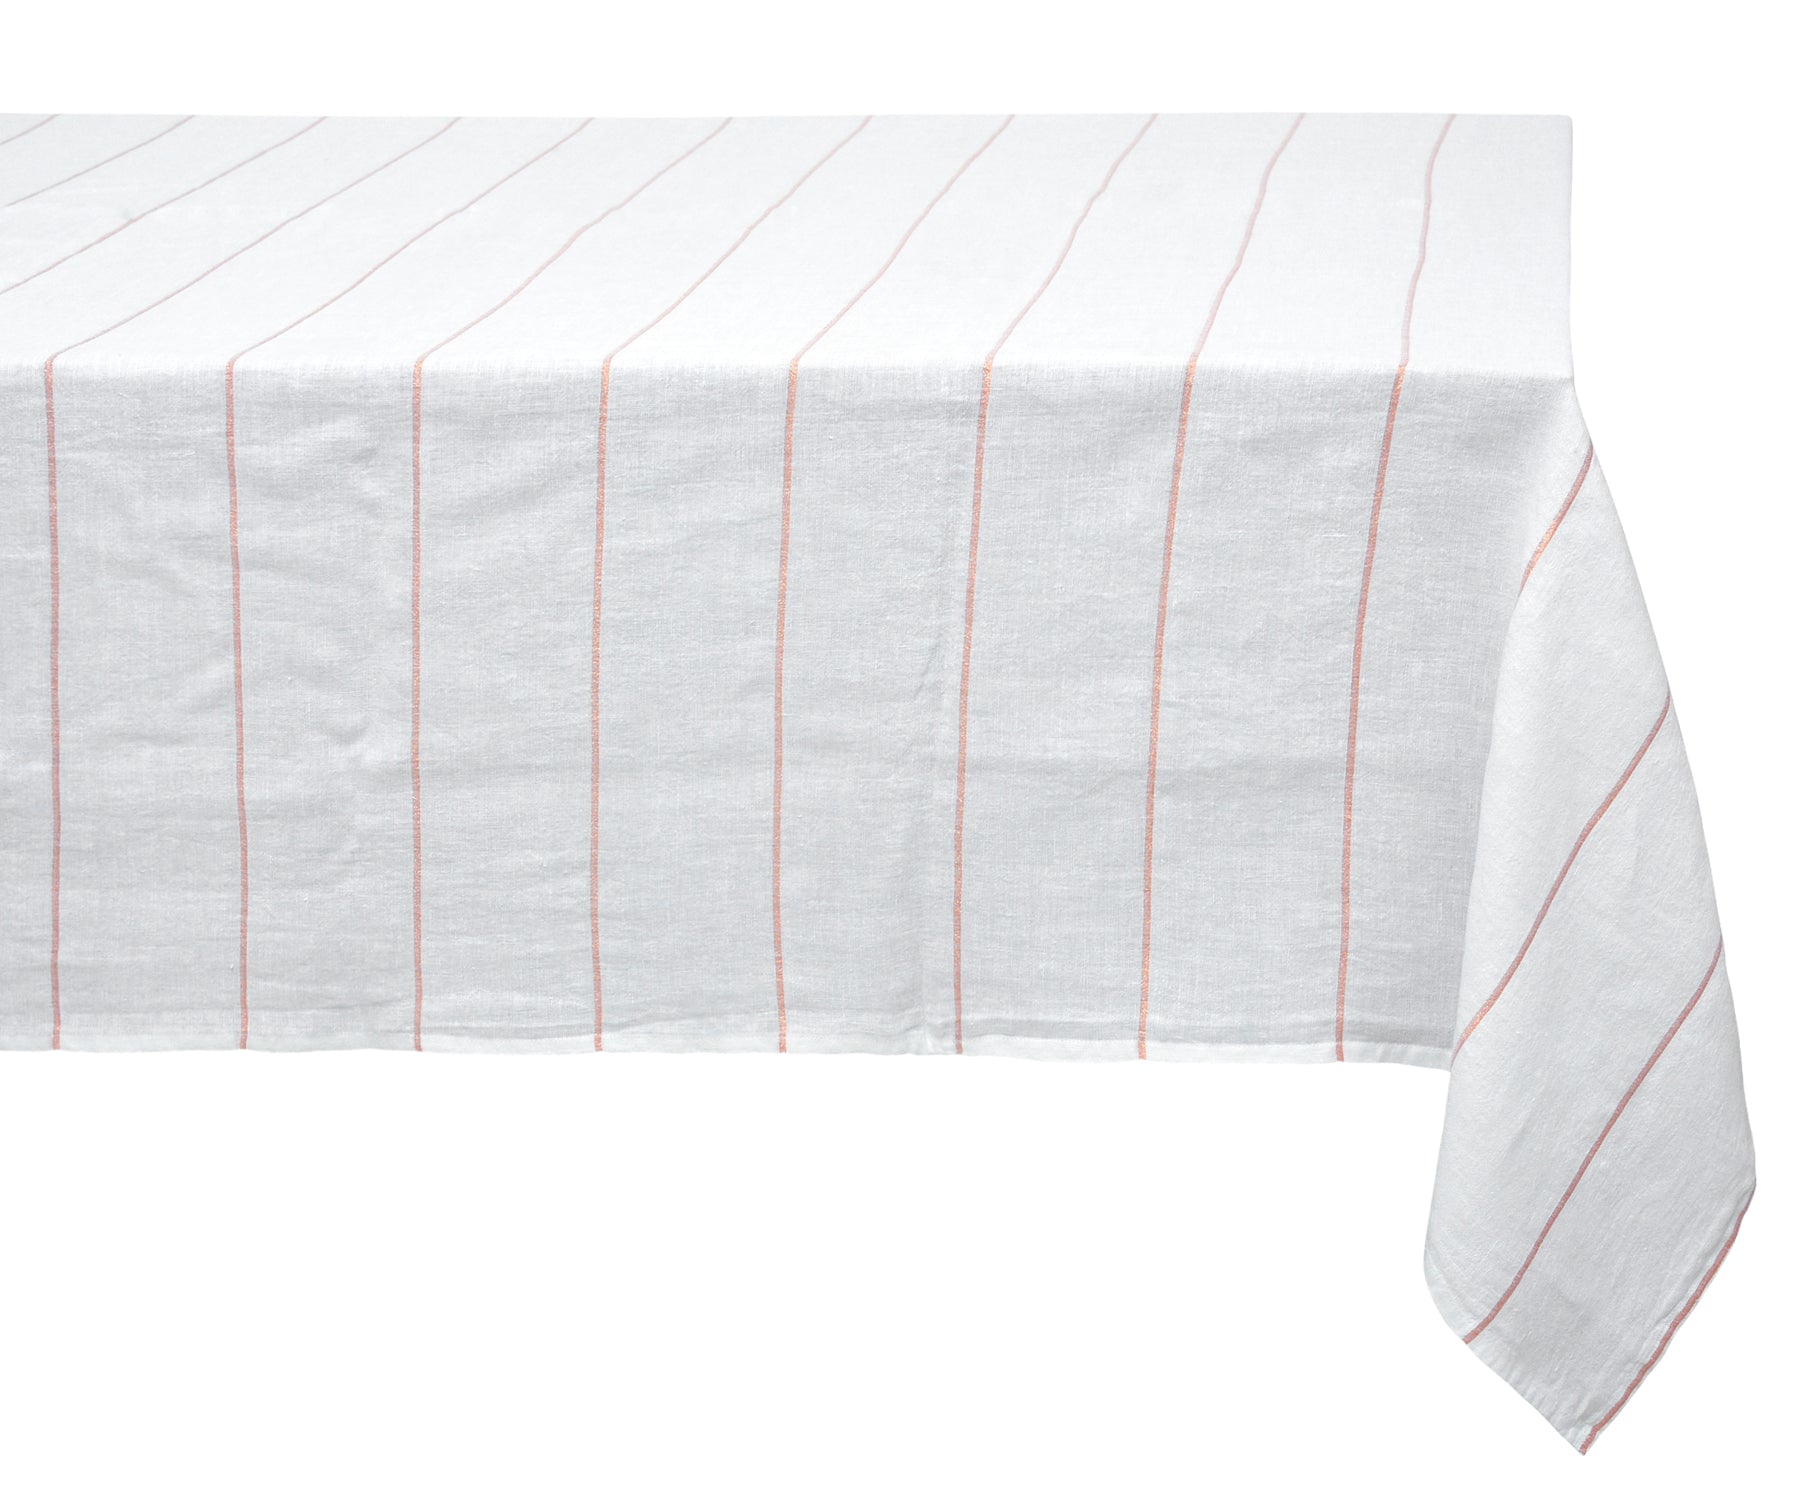 A cloth tablecloth adds elegance to formal dining settings.